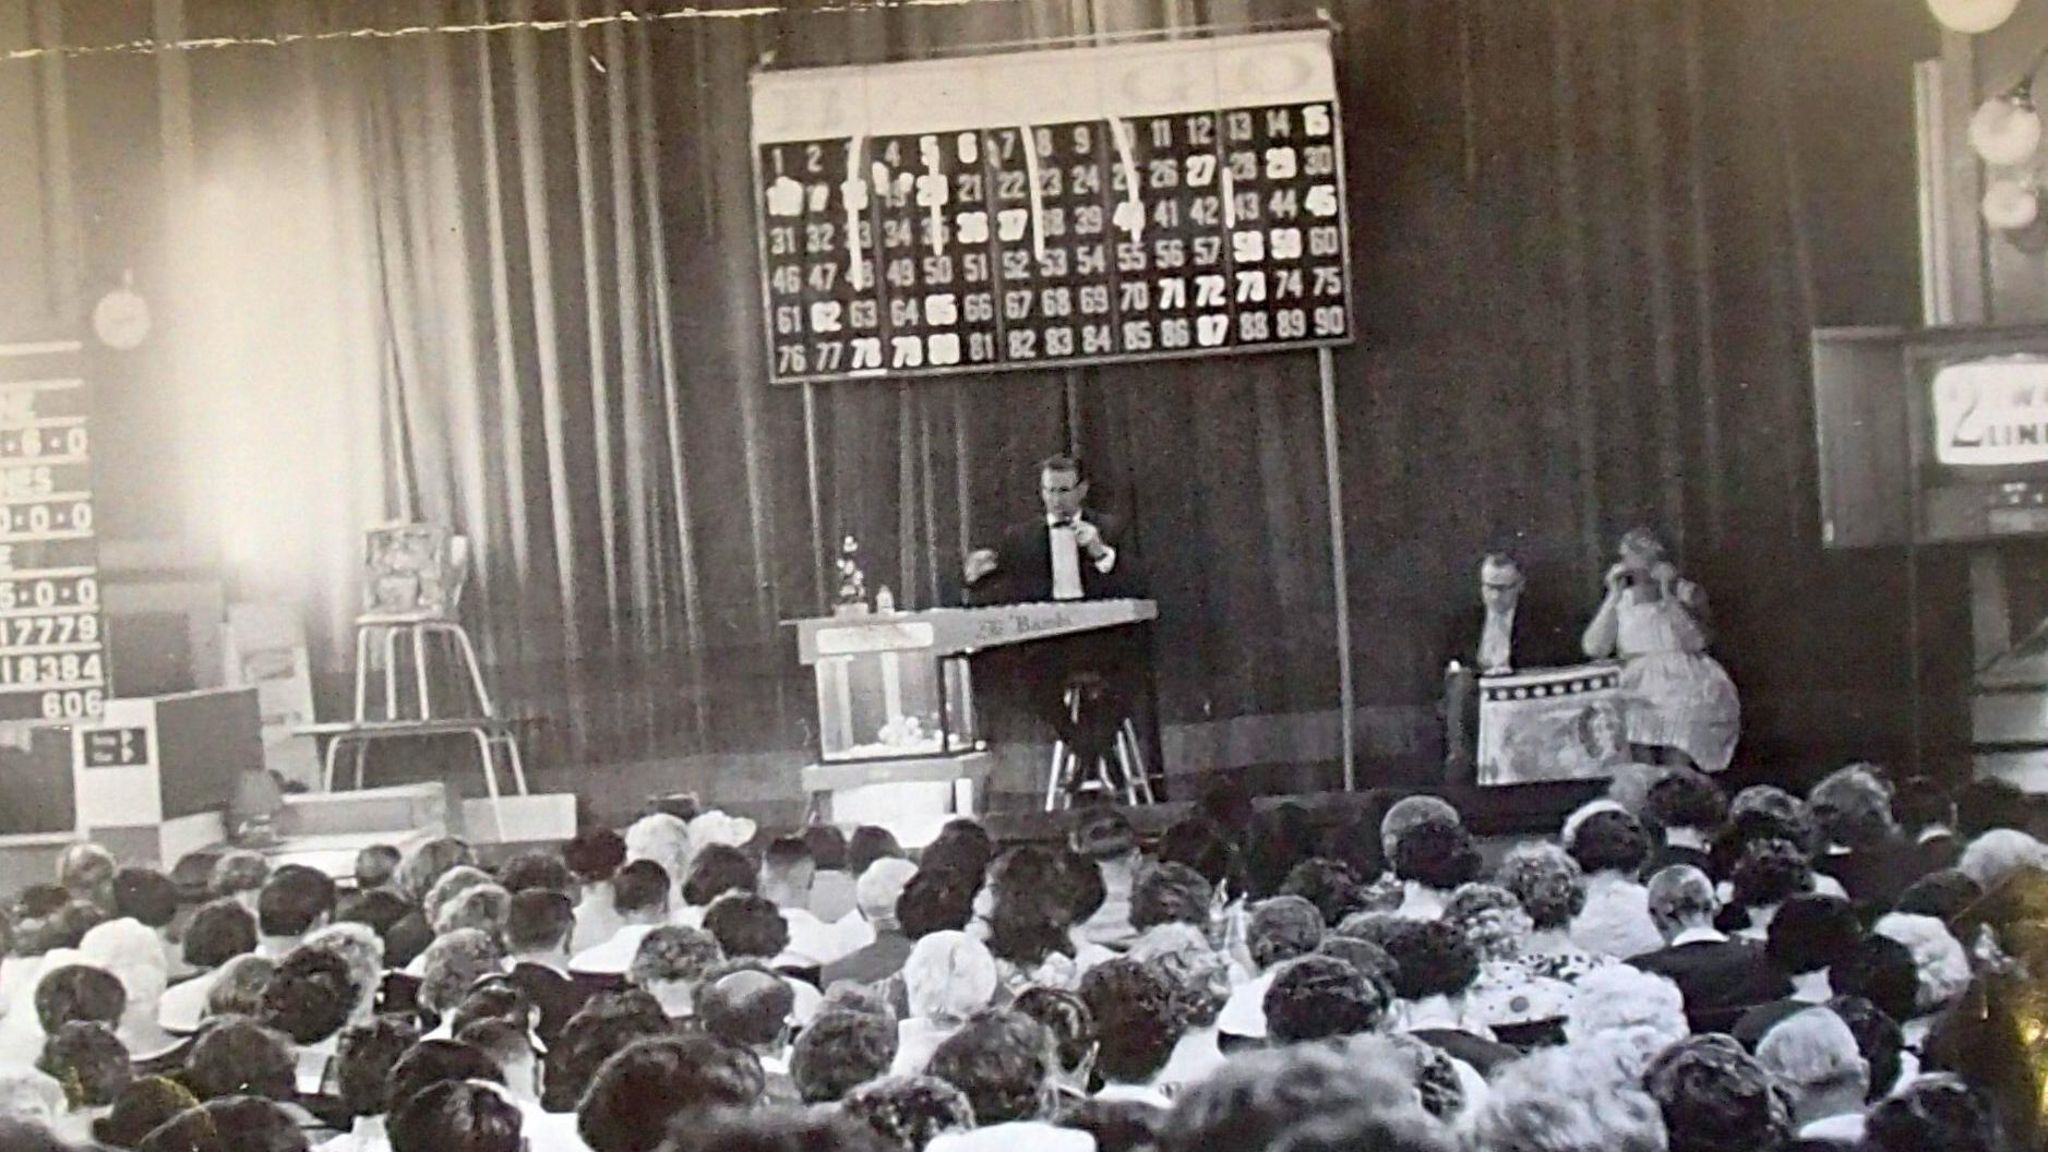 A crowd of people look at the stage where a man in black tie is sitting below a sign with numbers on them